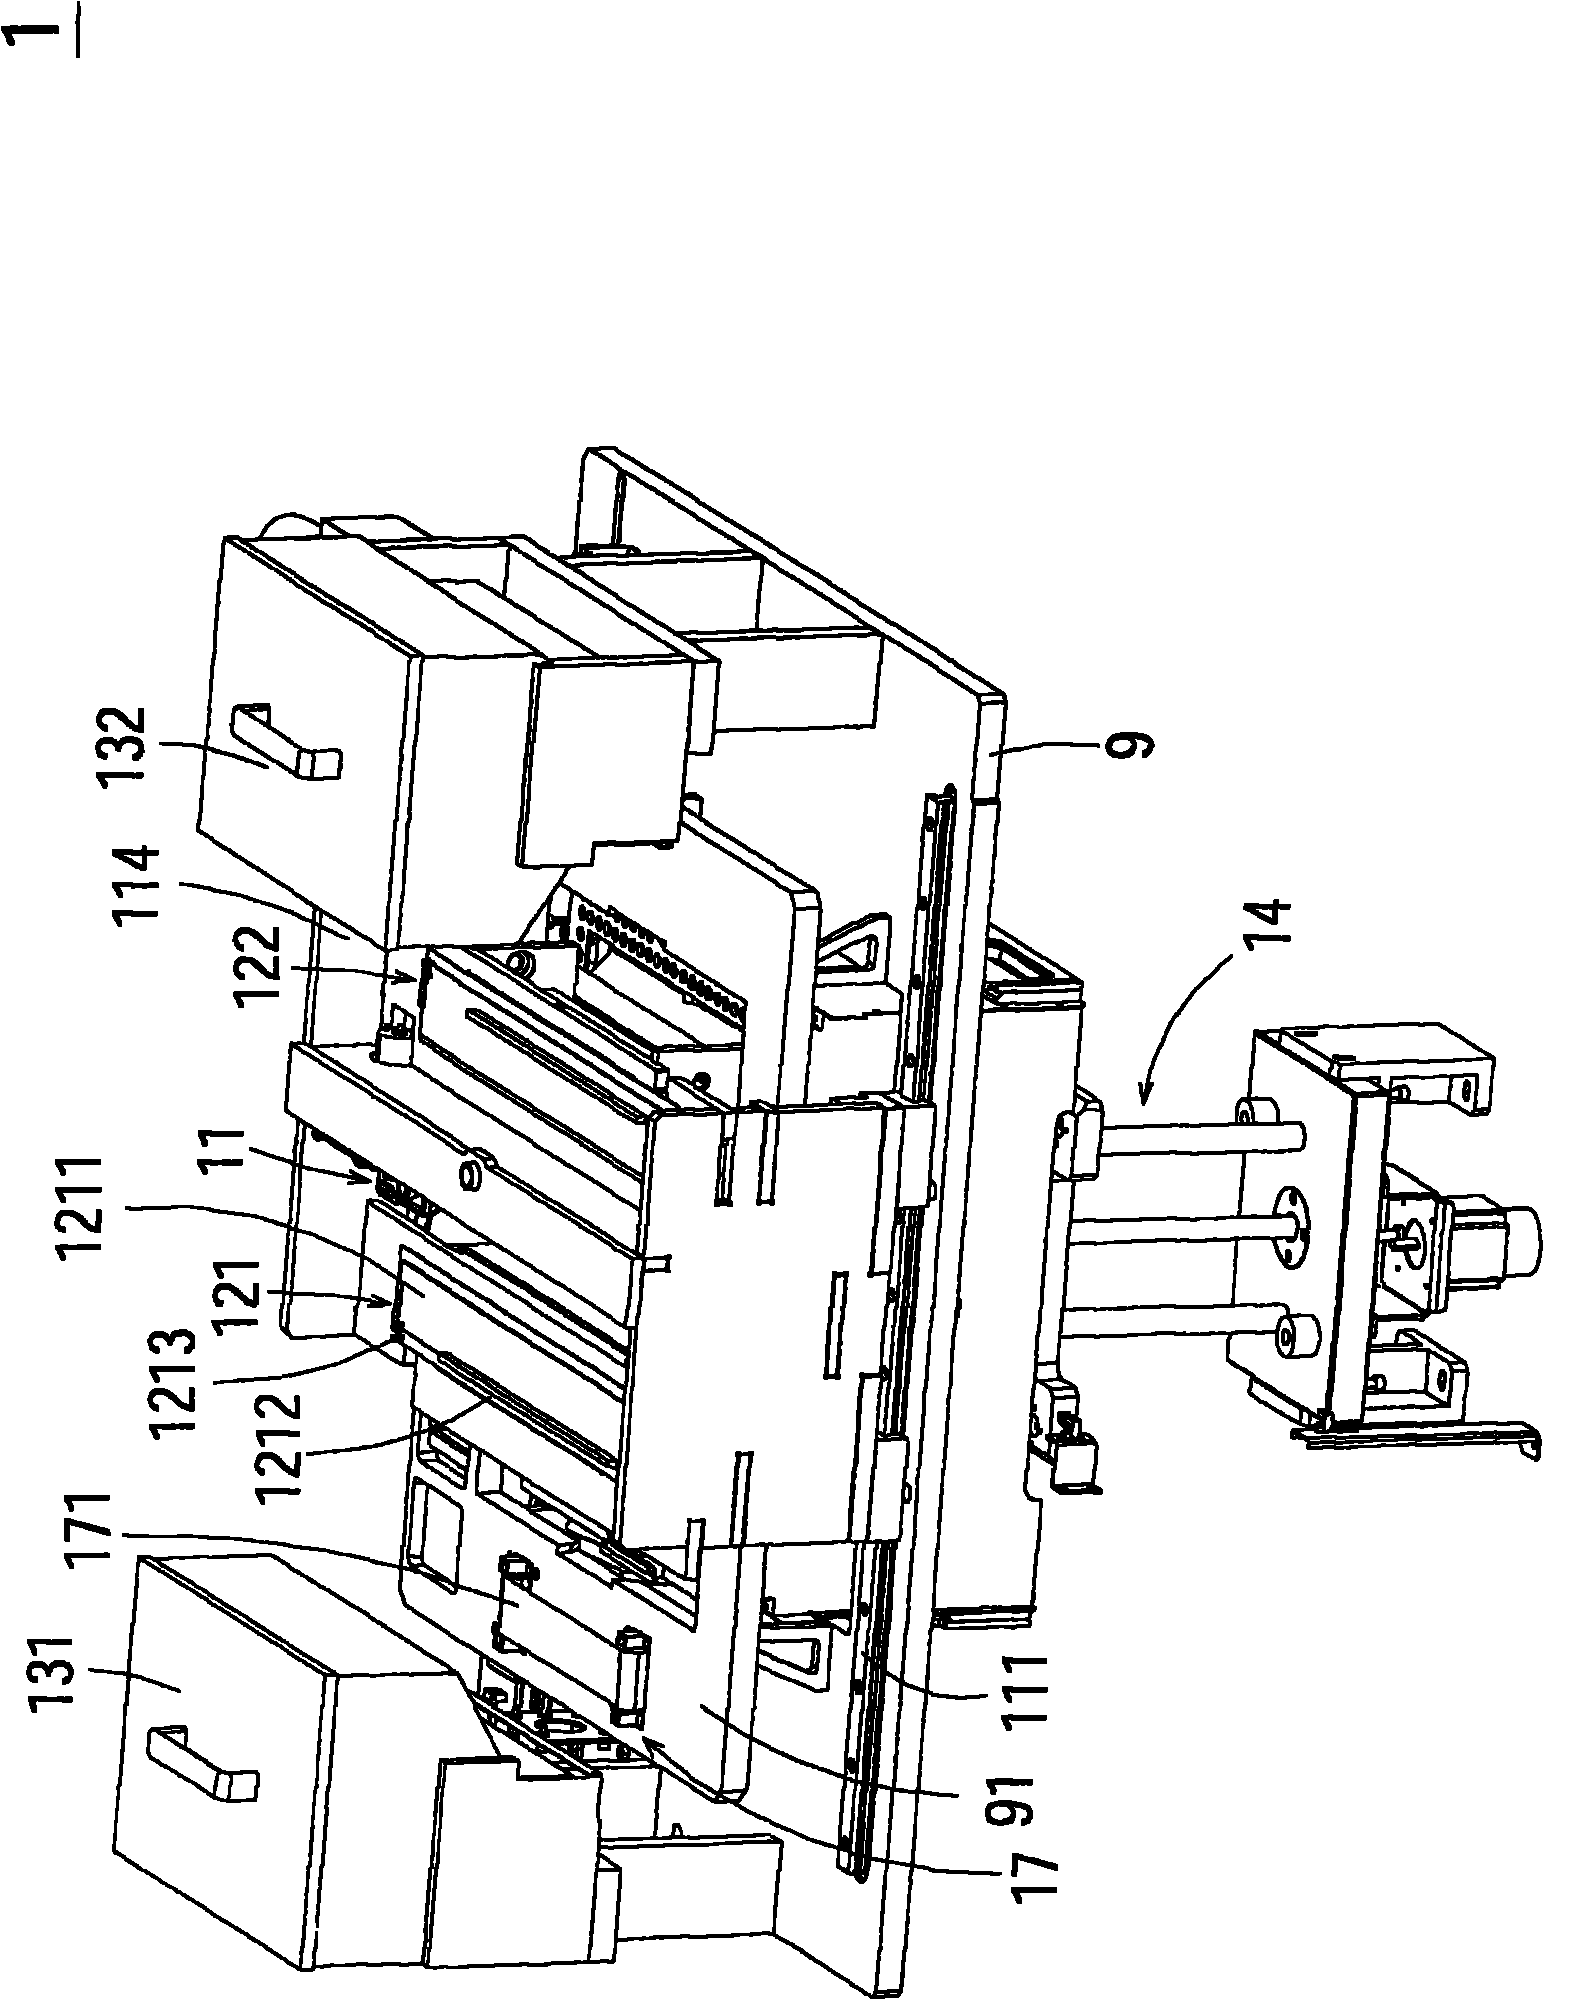 Dustproof device suitable for stereoscopic shaping mechanism